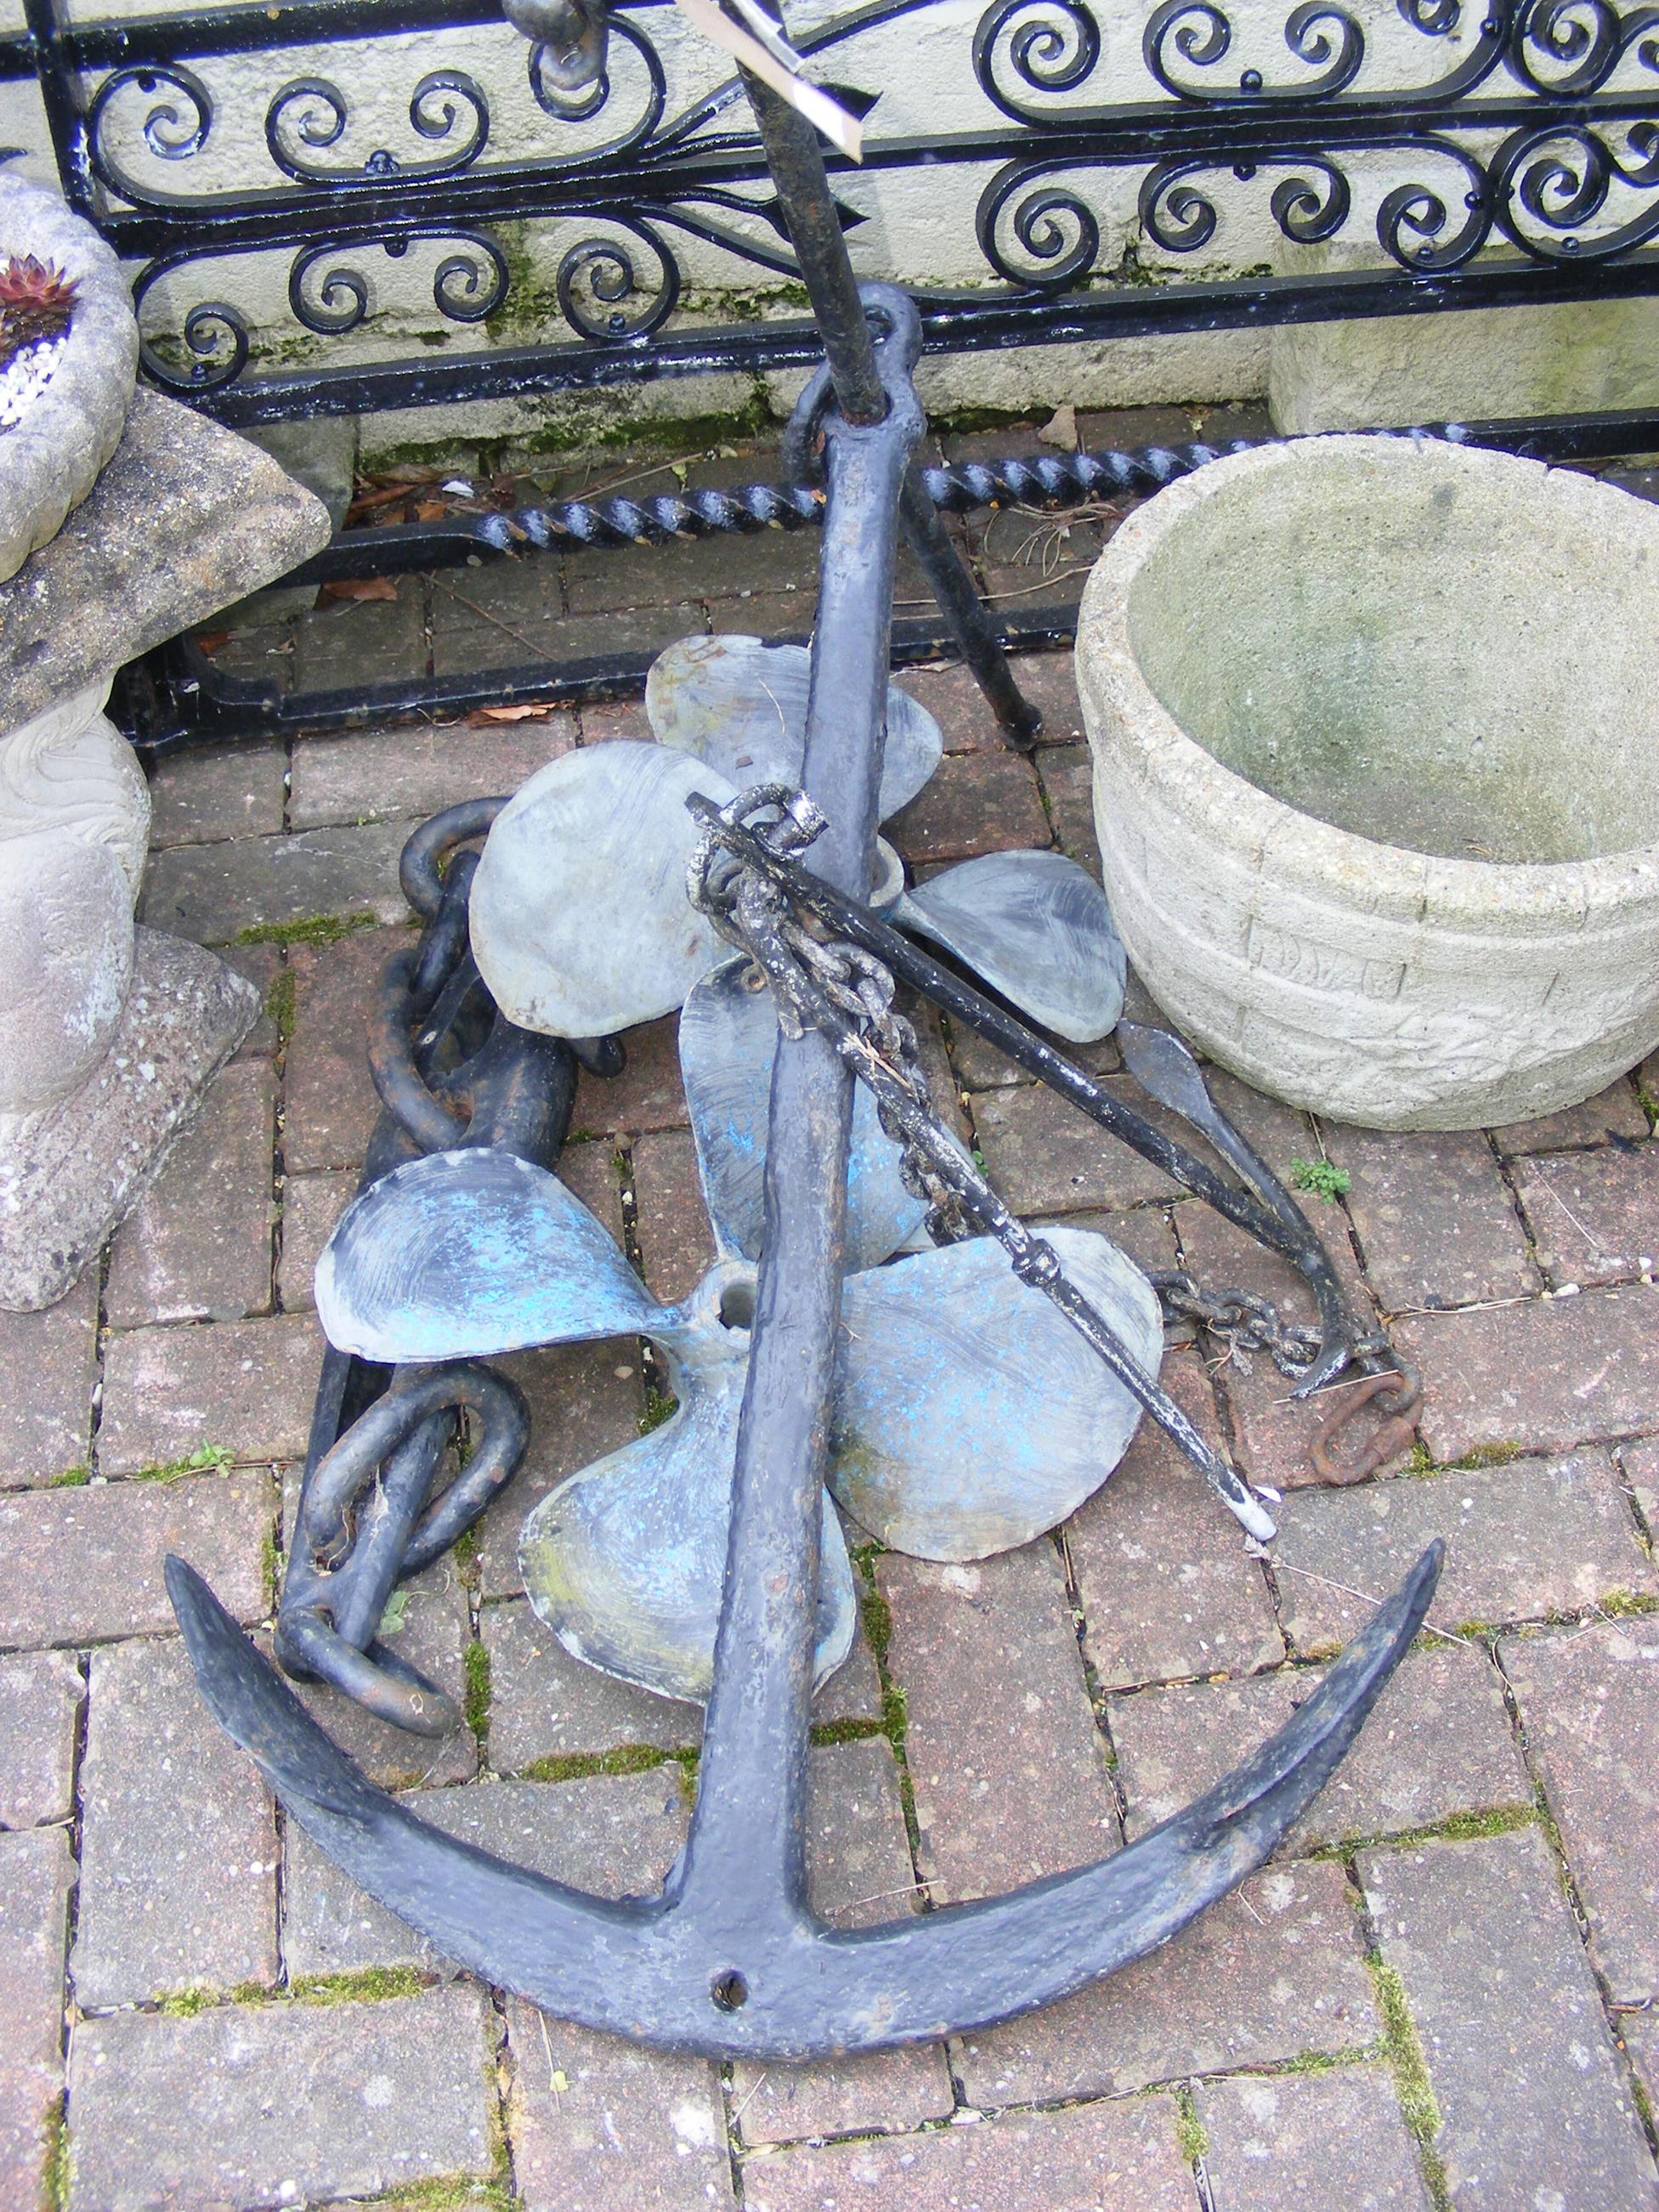 Assorted anchors and propellers